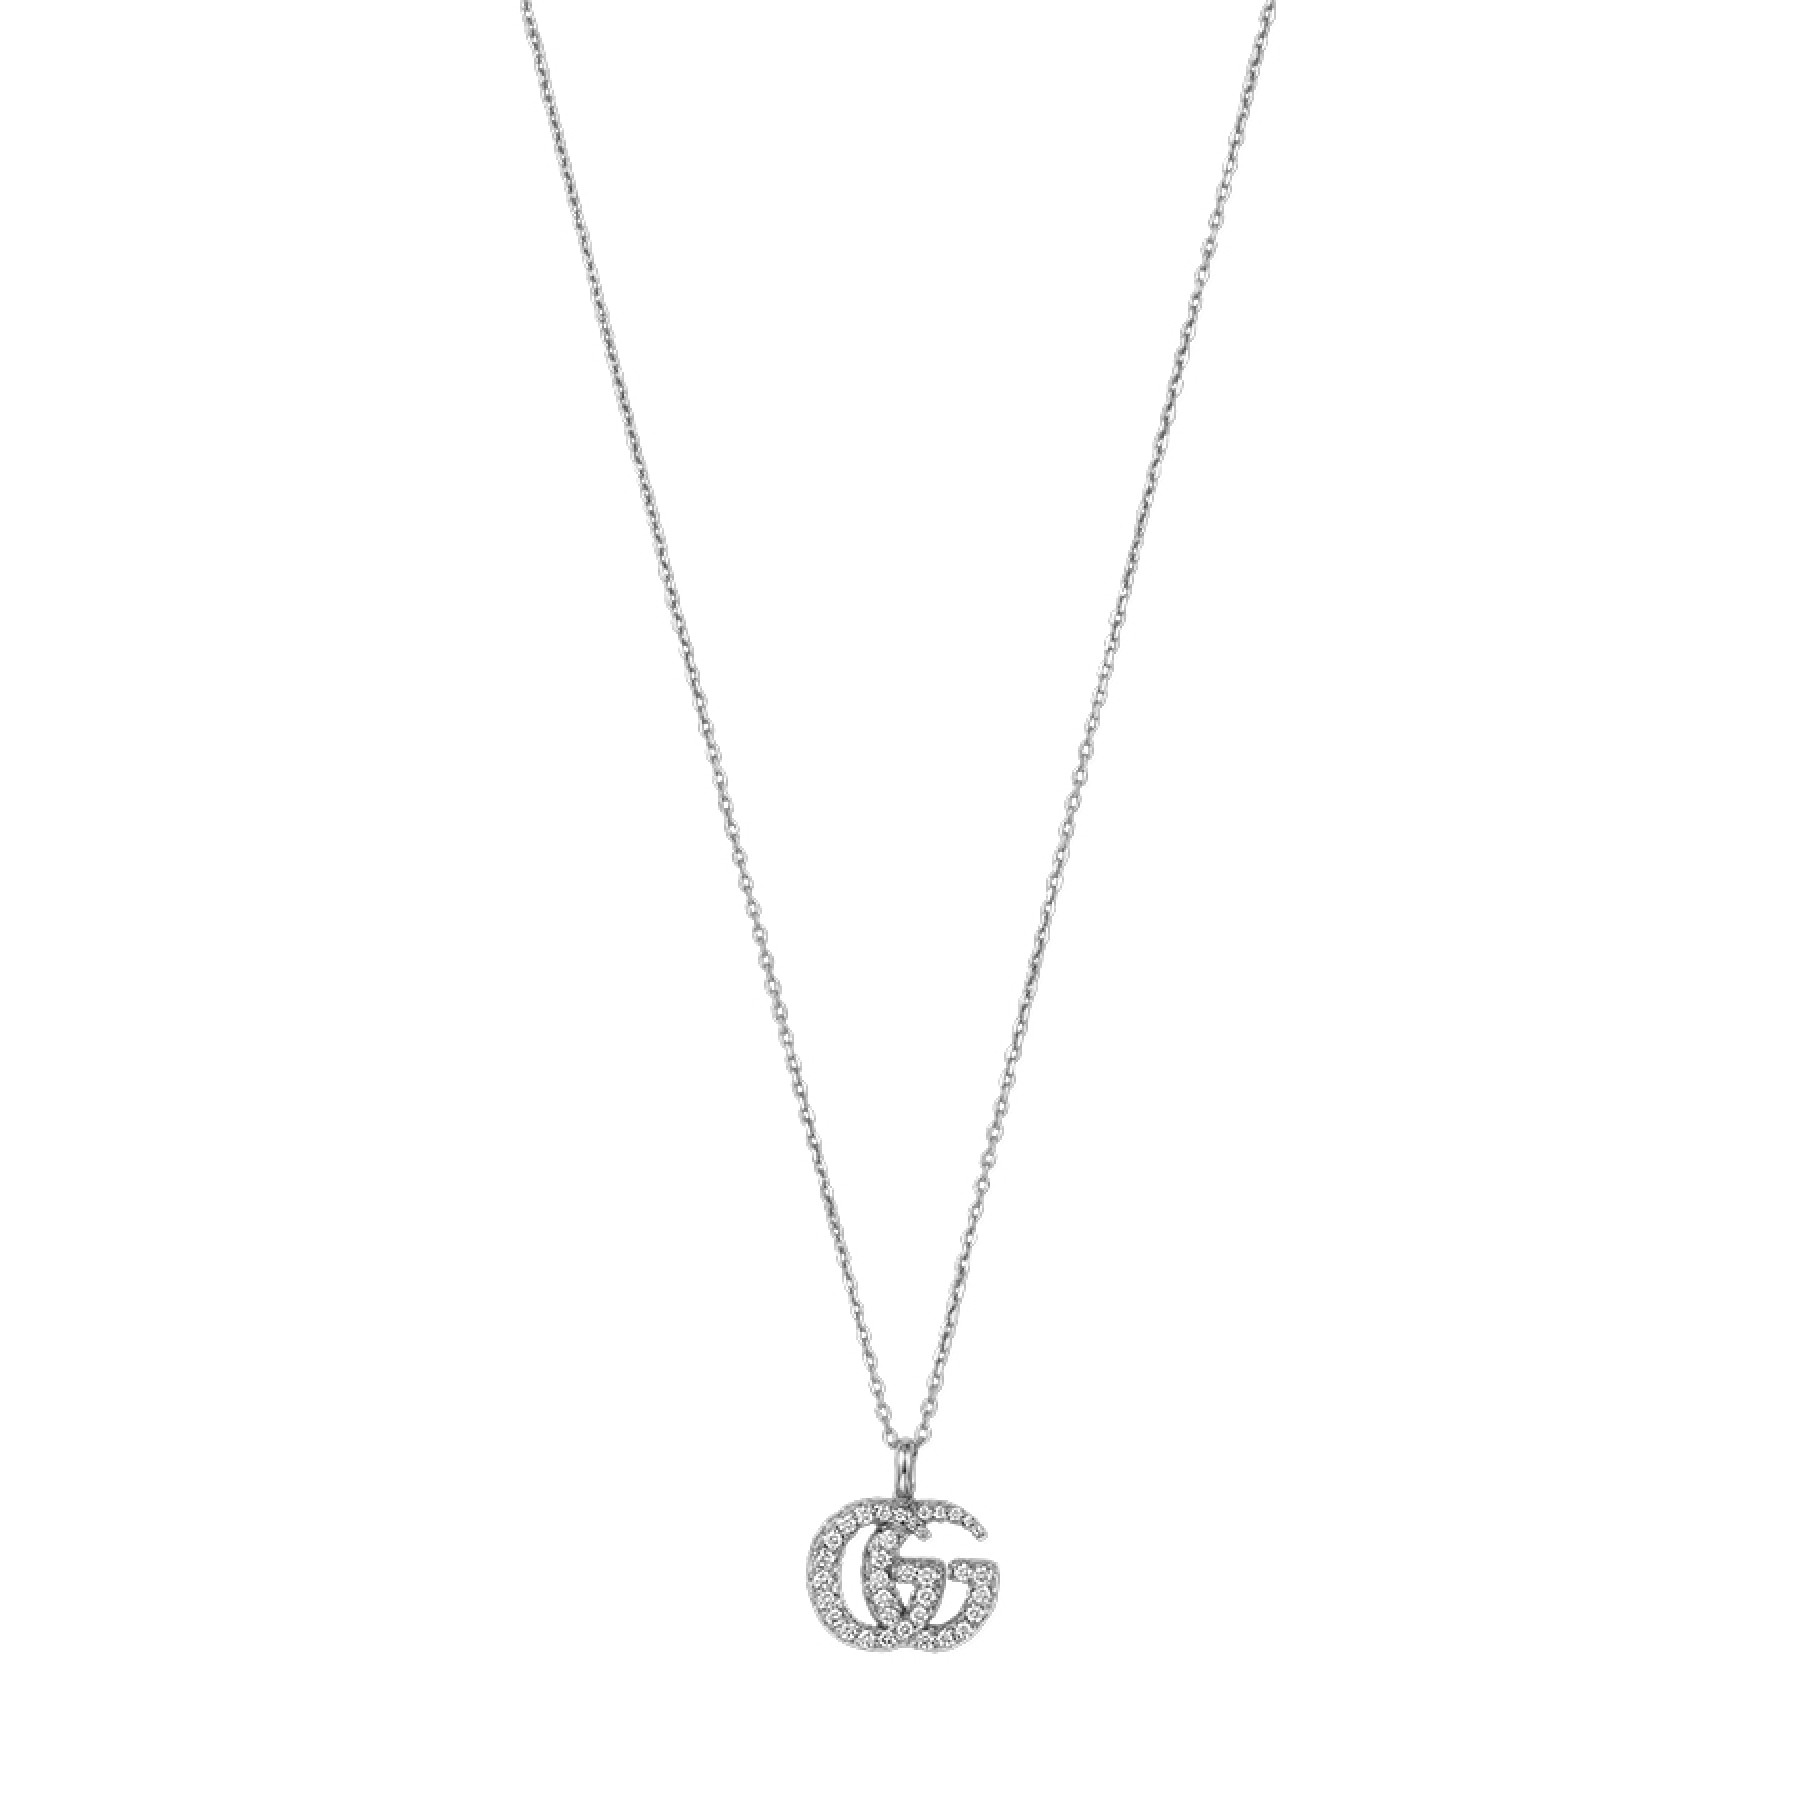 Gucci GG Running White Gold Small Diamond Necklace . Dunn Jewelers